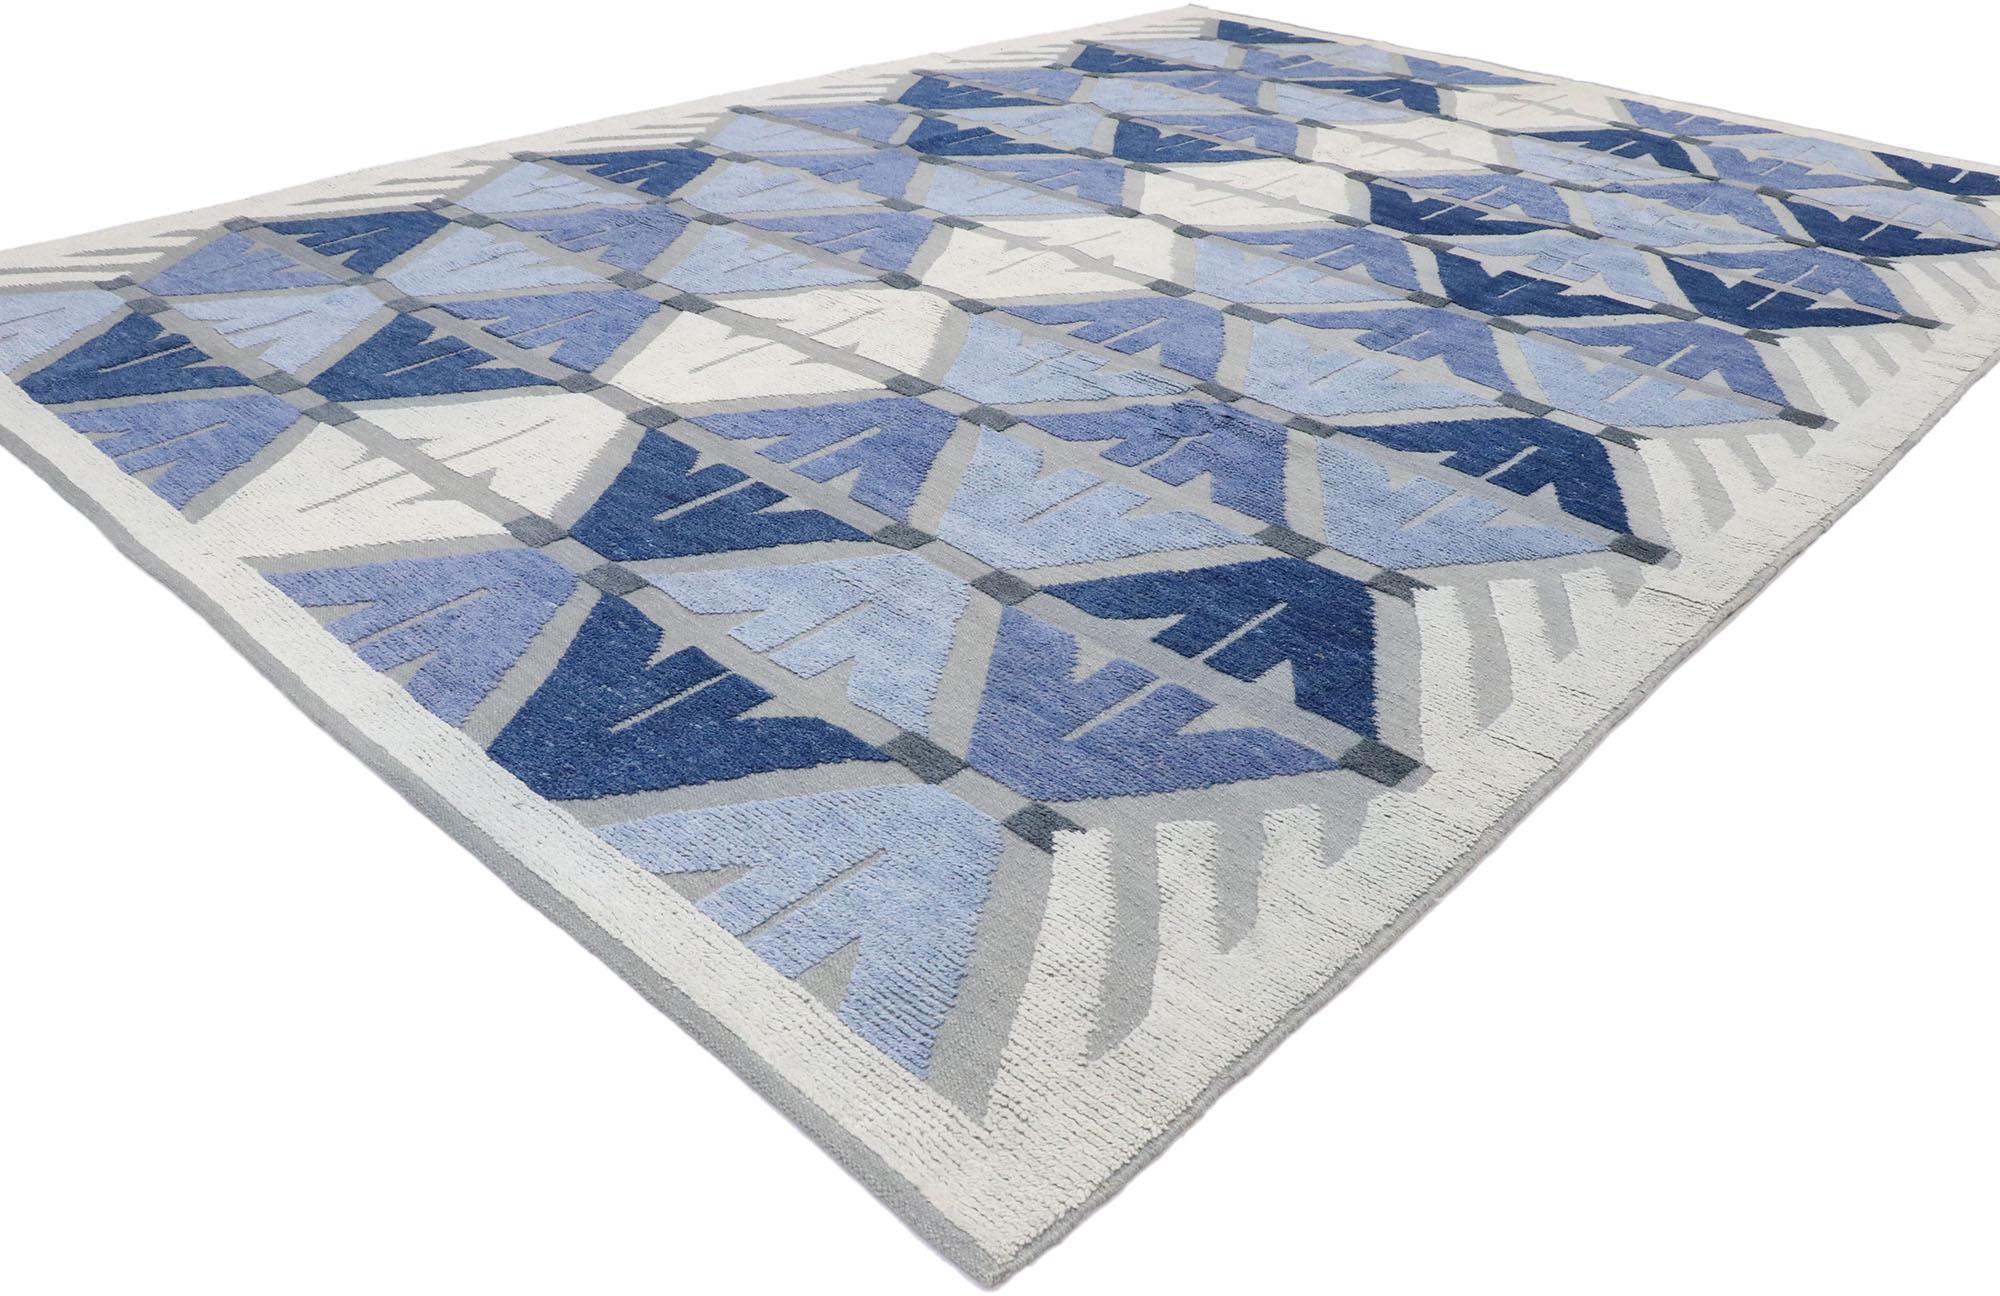 30559, new contemporary Indian Kilim Souf rug with Raised design. A dynamic fusion of contemporary trends and modern style casual meets the eye in this geometric rug. It is made with a unique flat-weave Souf technique of handwoven wool with a high